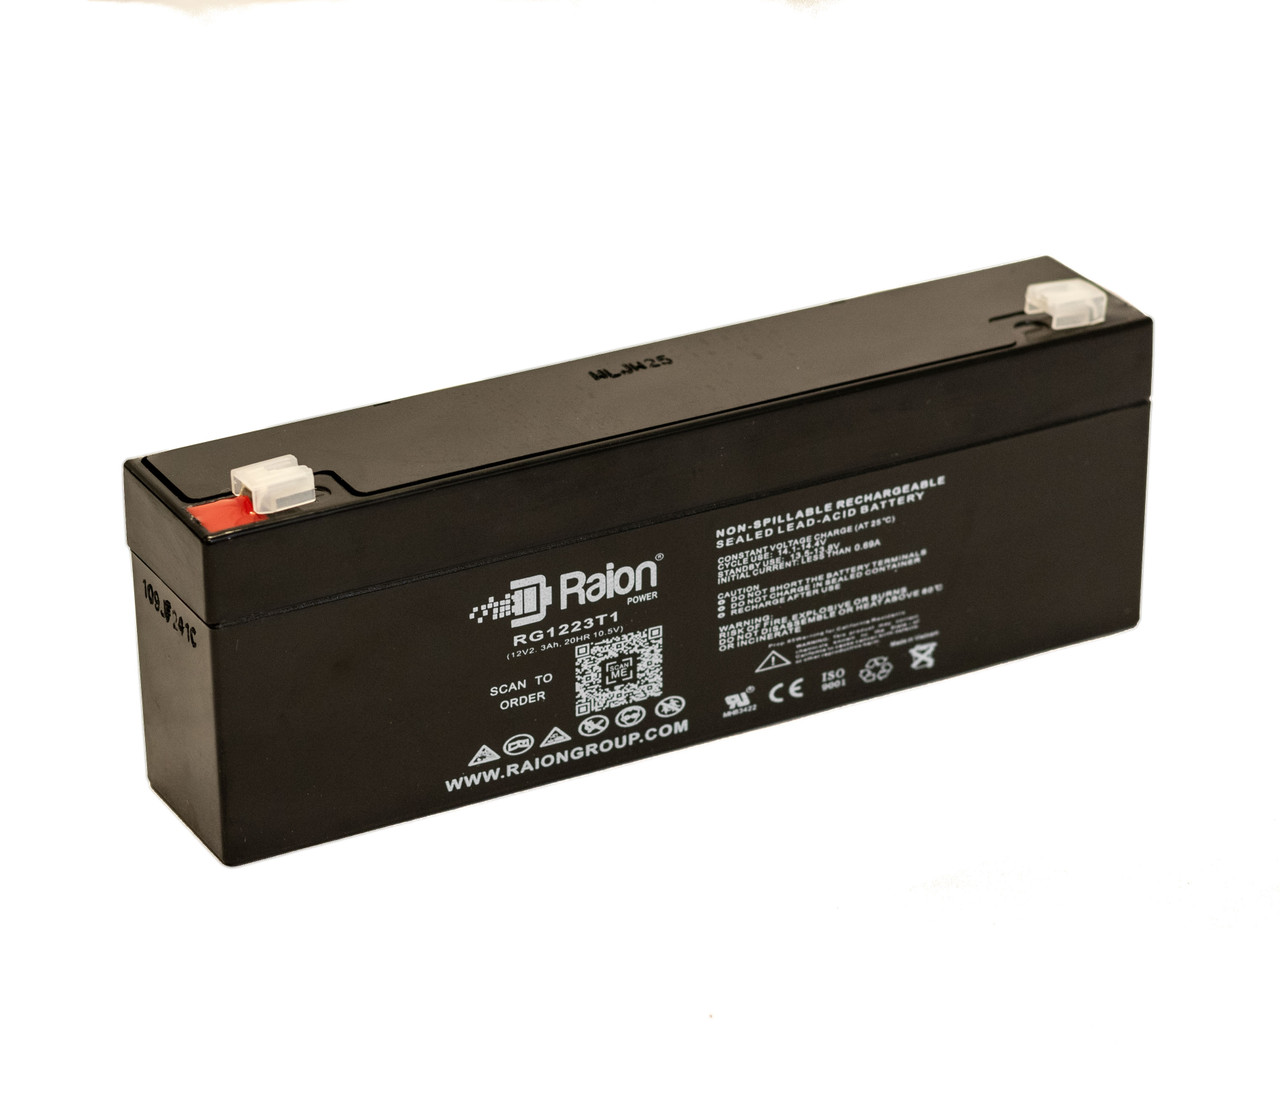 Raion Power RG1223T1 Replacement Battery for Discover D1223